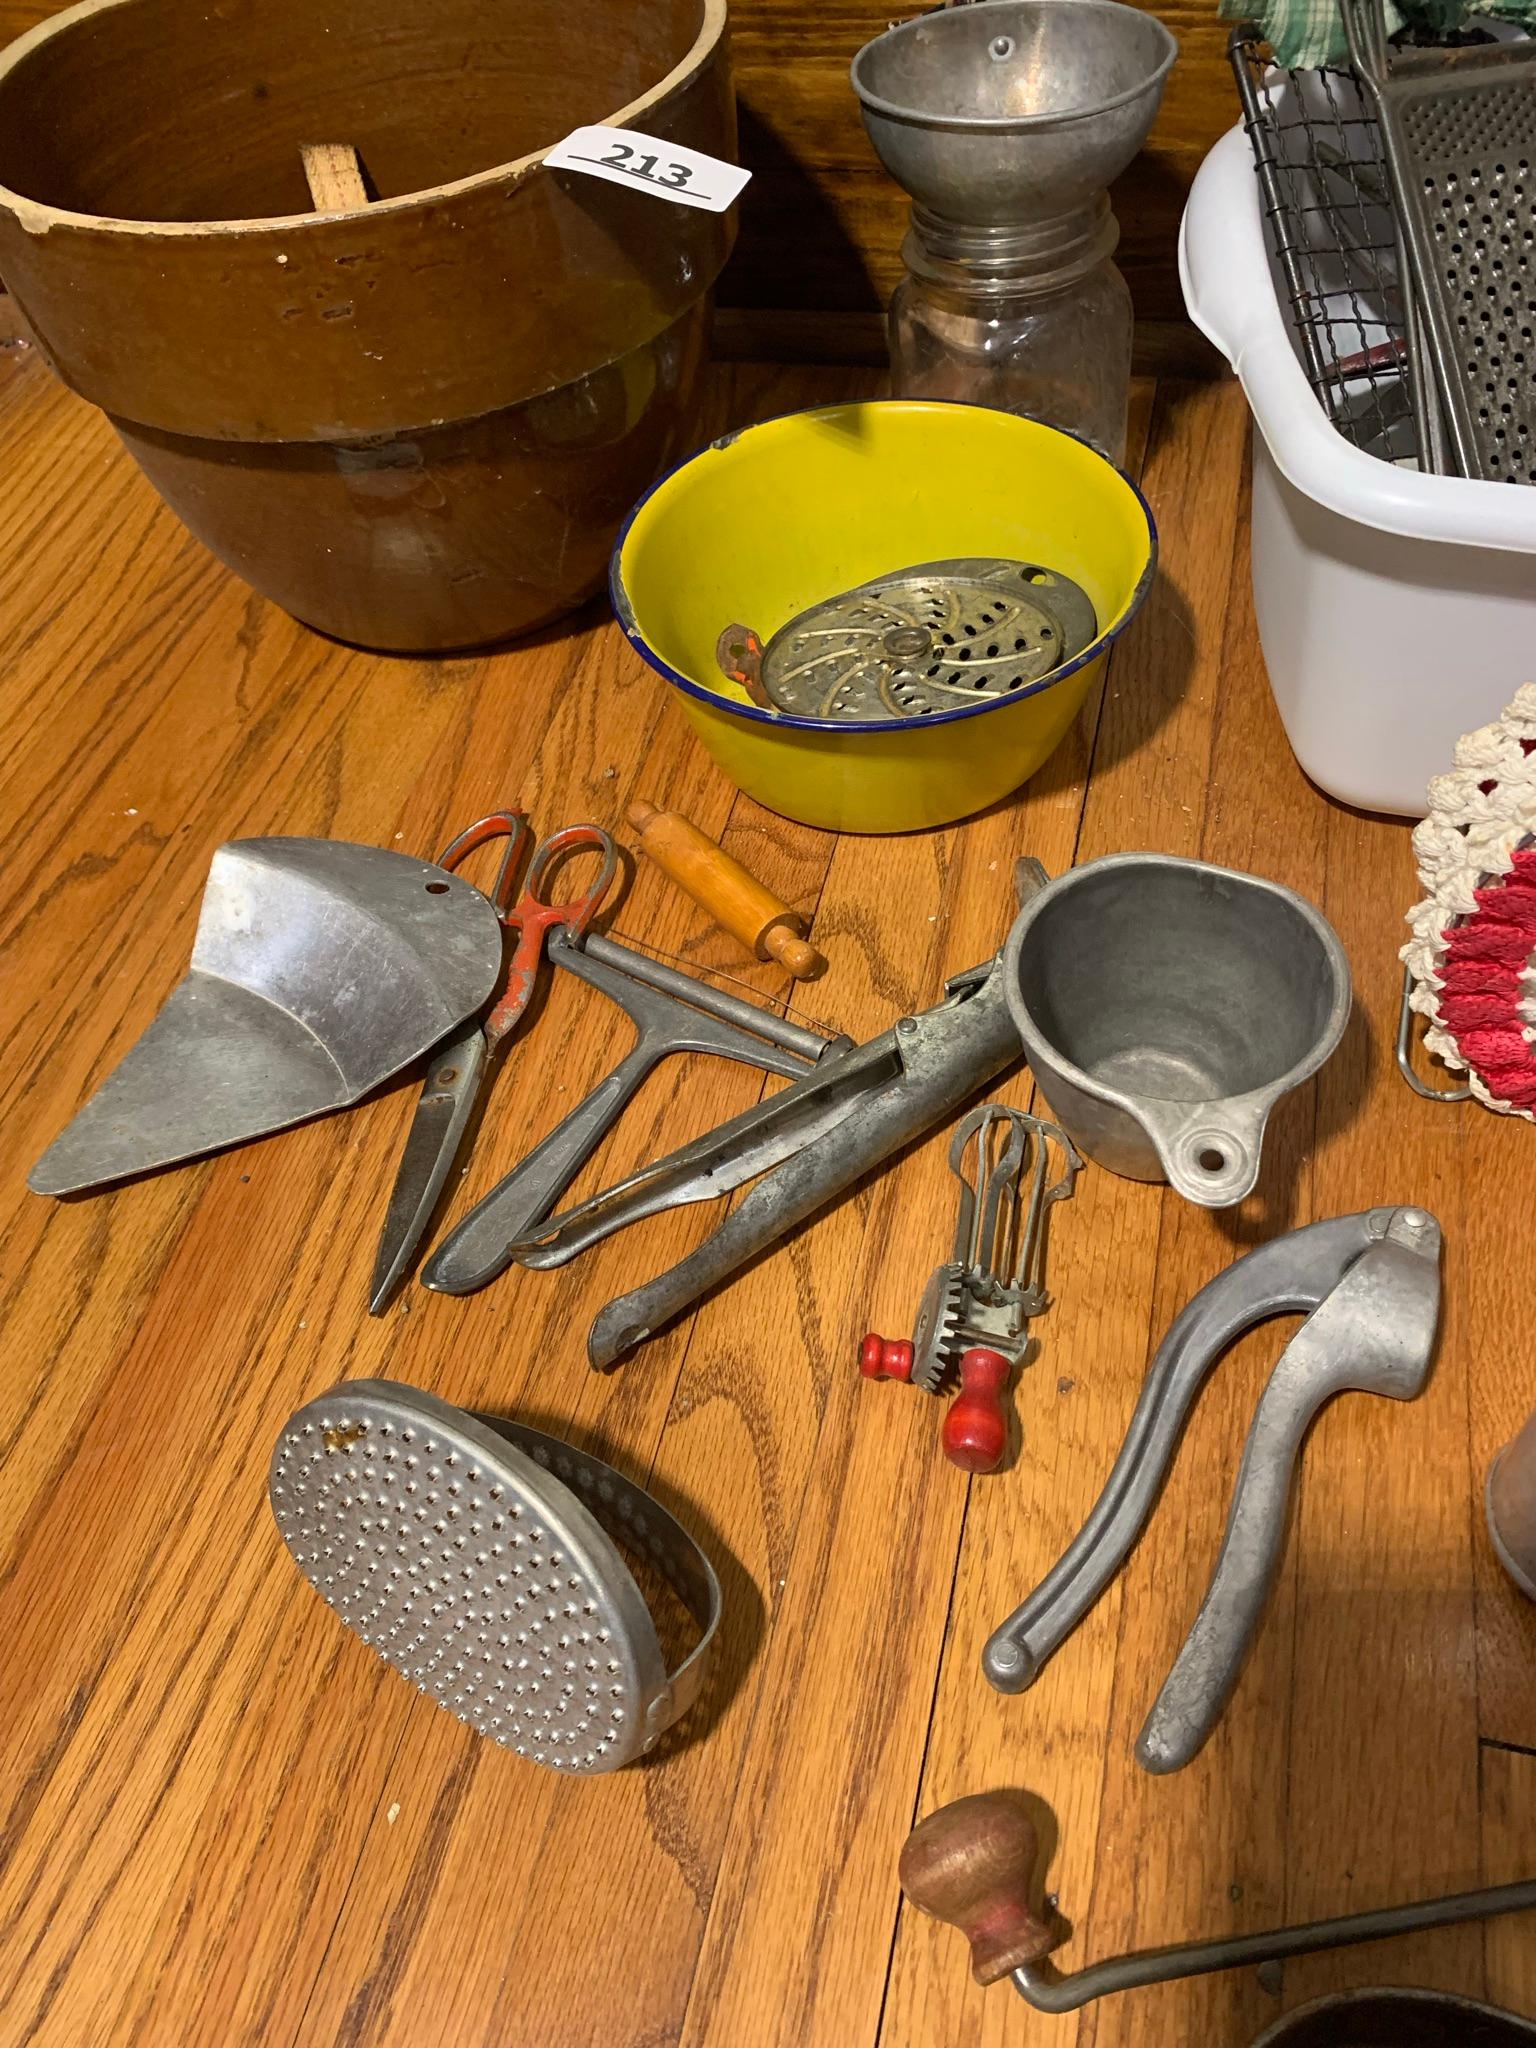 Great Group of Antique Kitchen Items